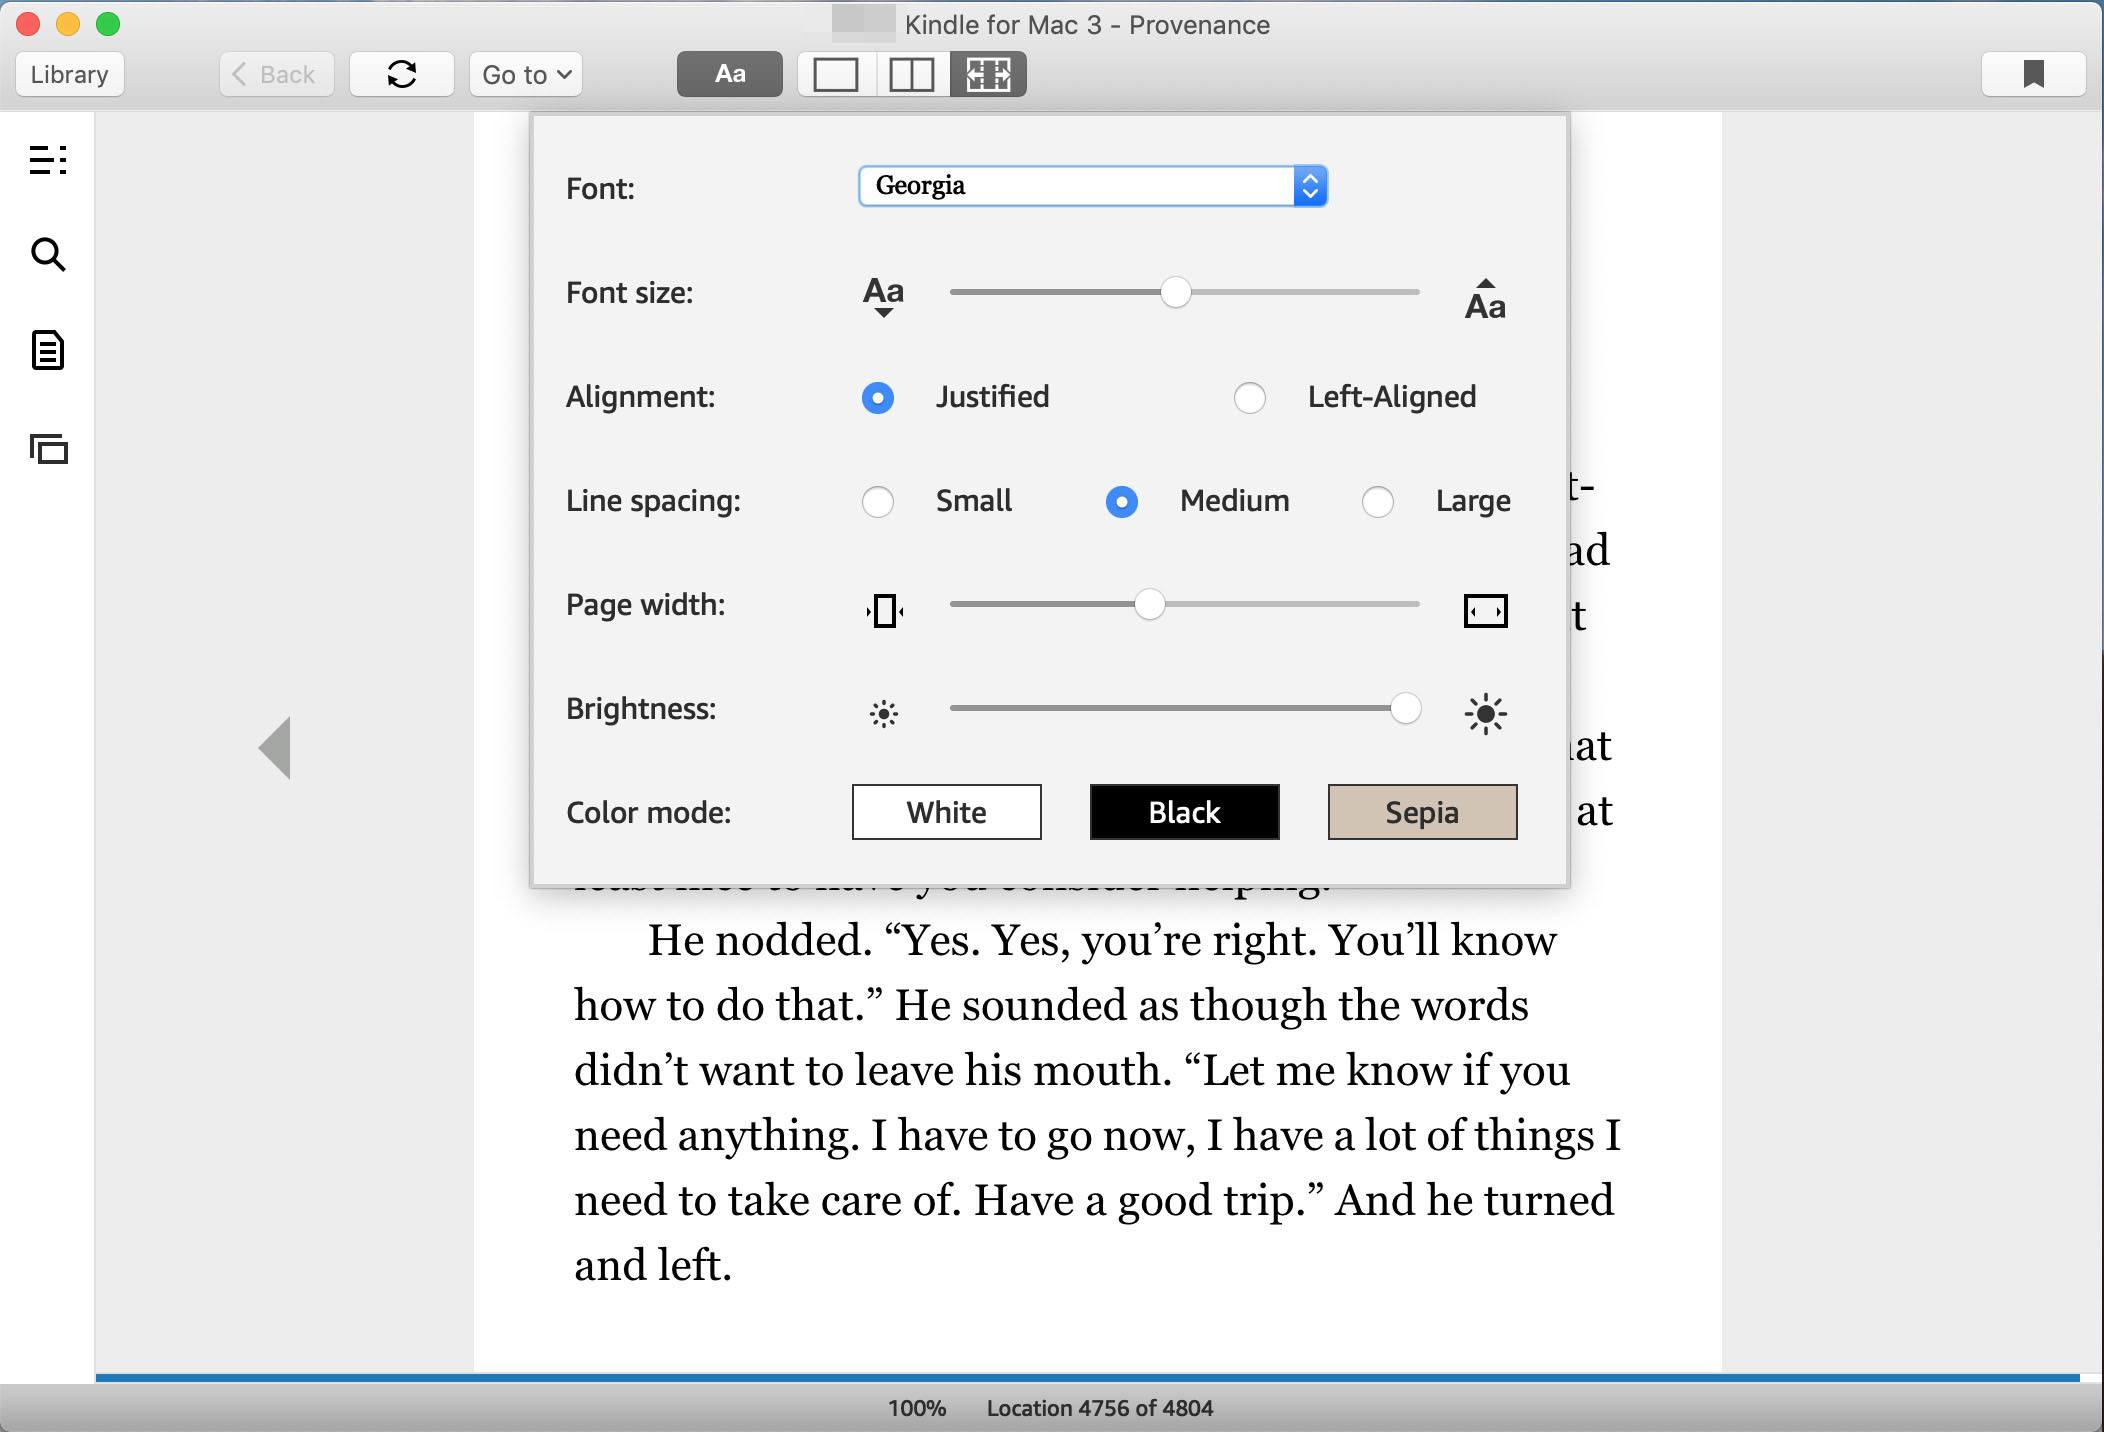 kindle app for the mac